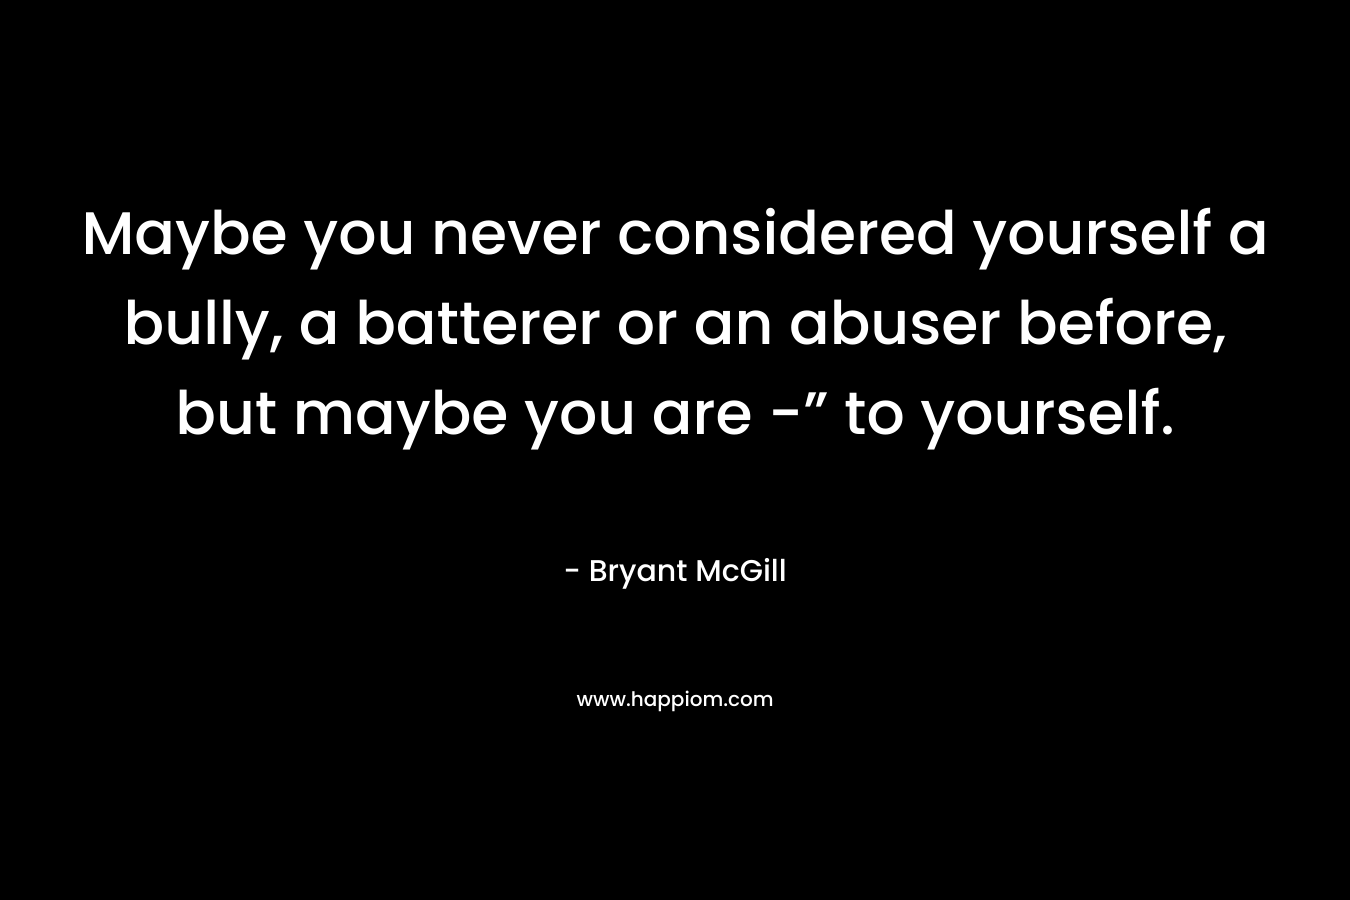 Maybe you never considered yourself a bully, a batterer or an abuser before, but maybe you are -” to yourself.